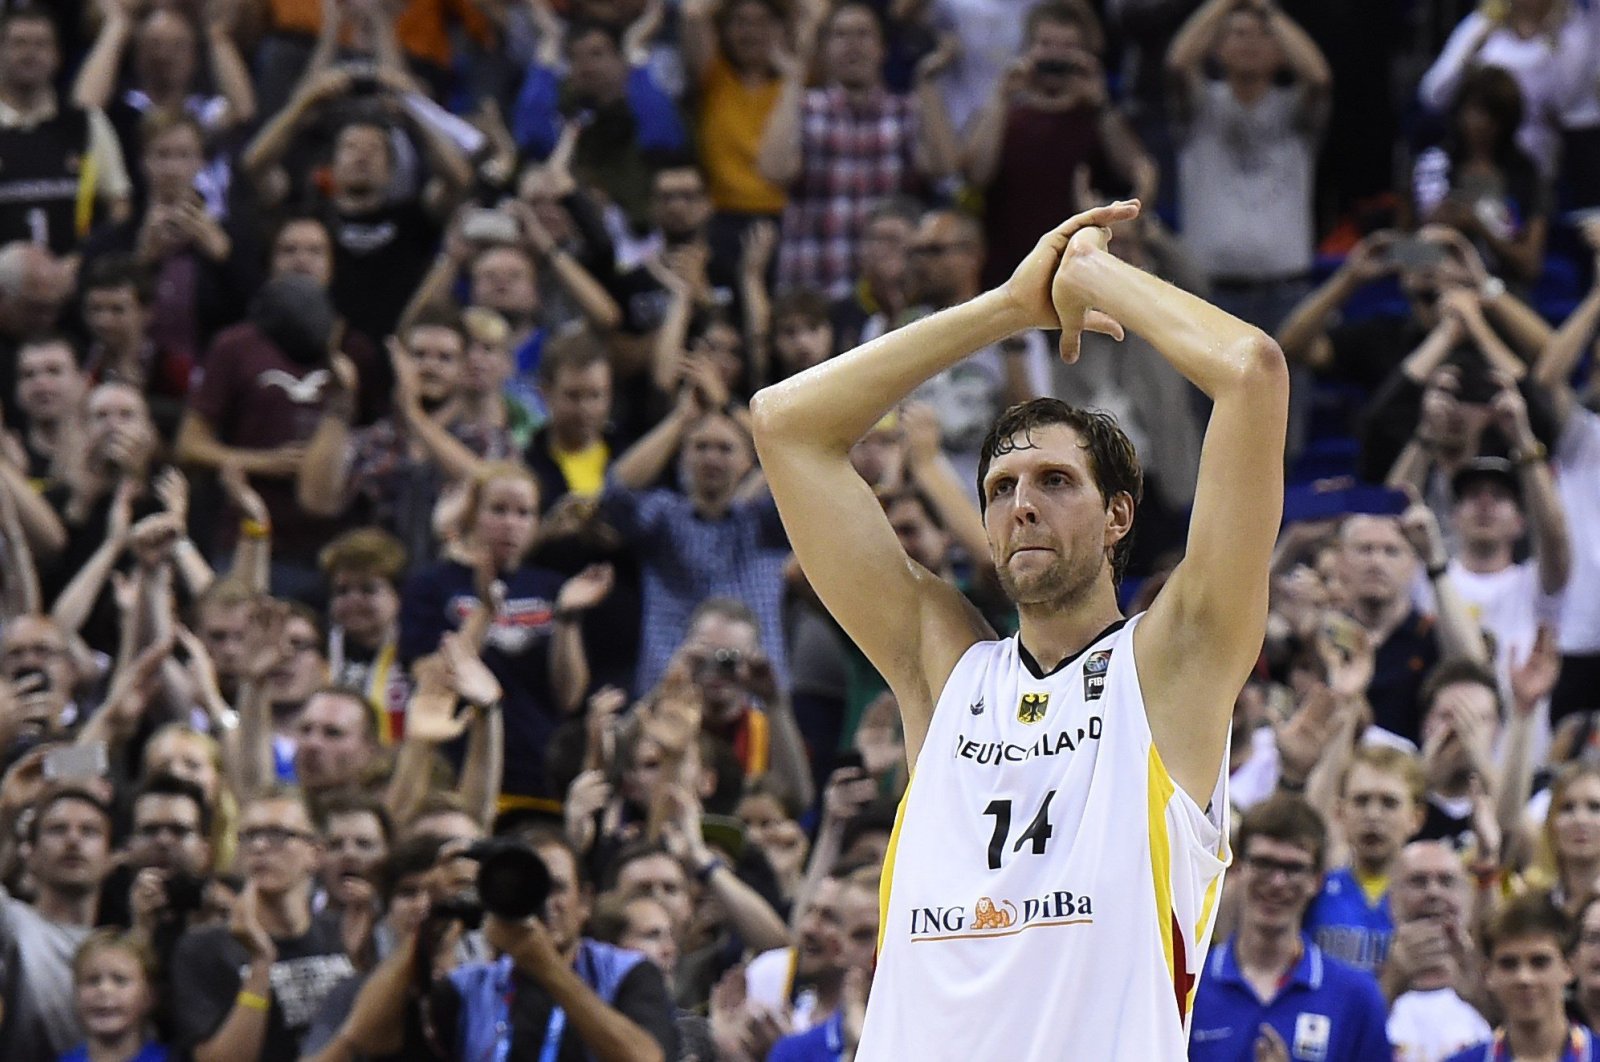 Dirk Nowitzki reacts after the EuroBasket Group B match between Germany and Spain, in Berlin, Germany, Sept. 10, 2015. (AFP Photo)